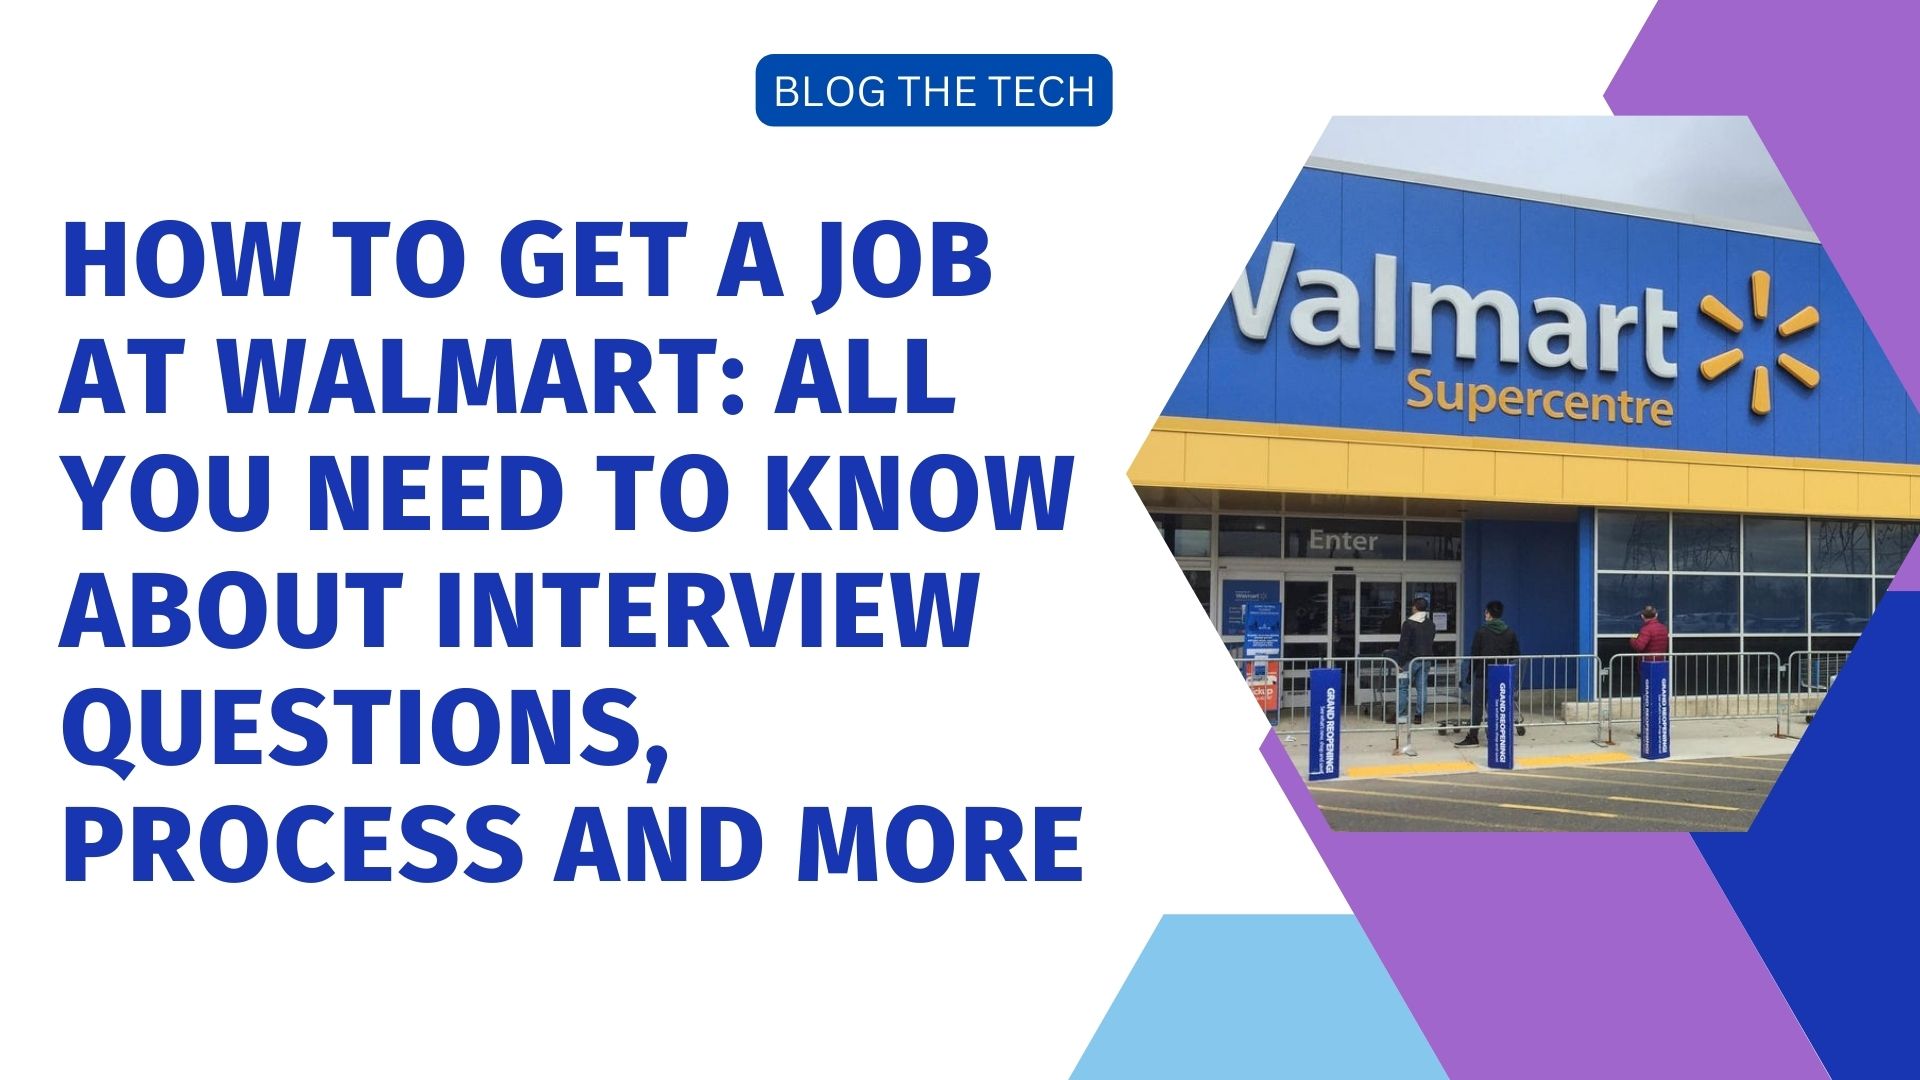 How to get a job at Walmart: All you need to know